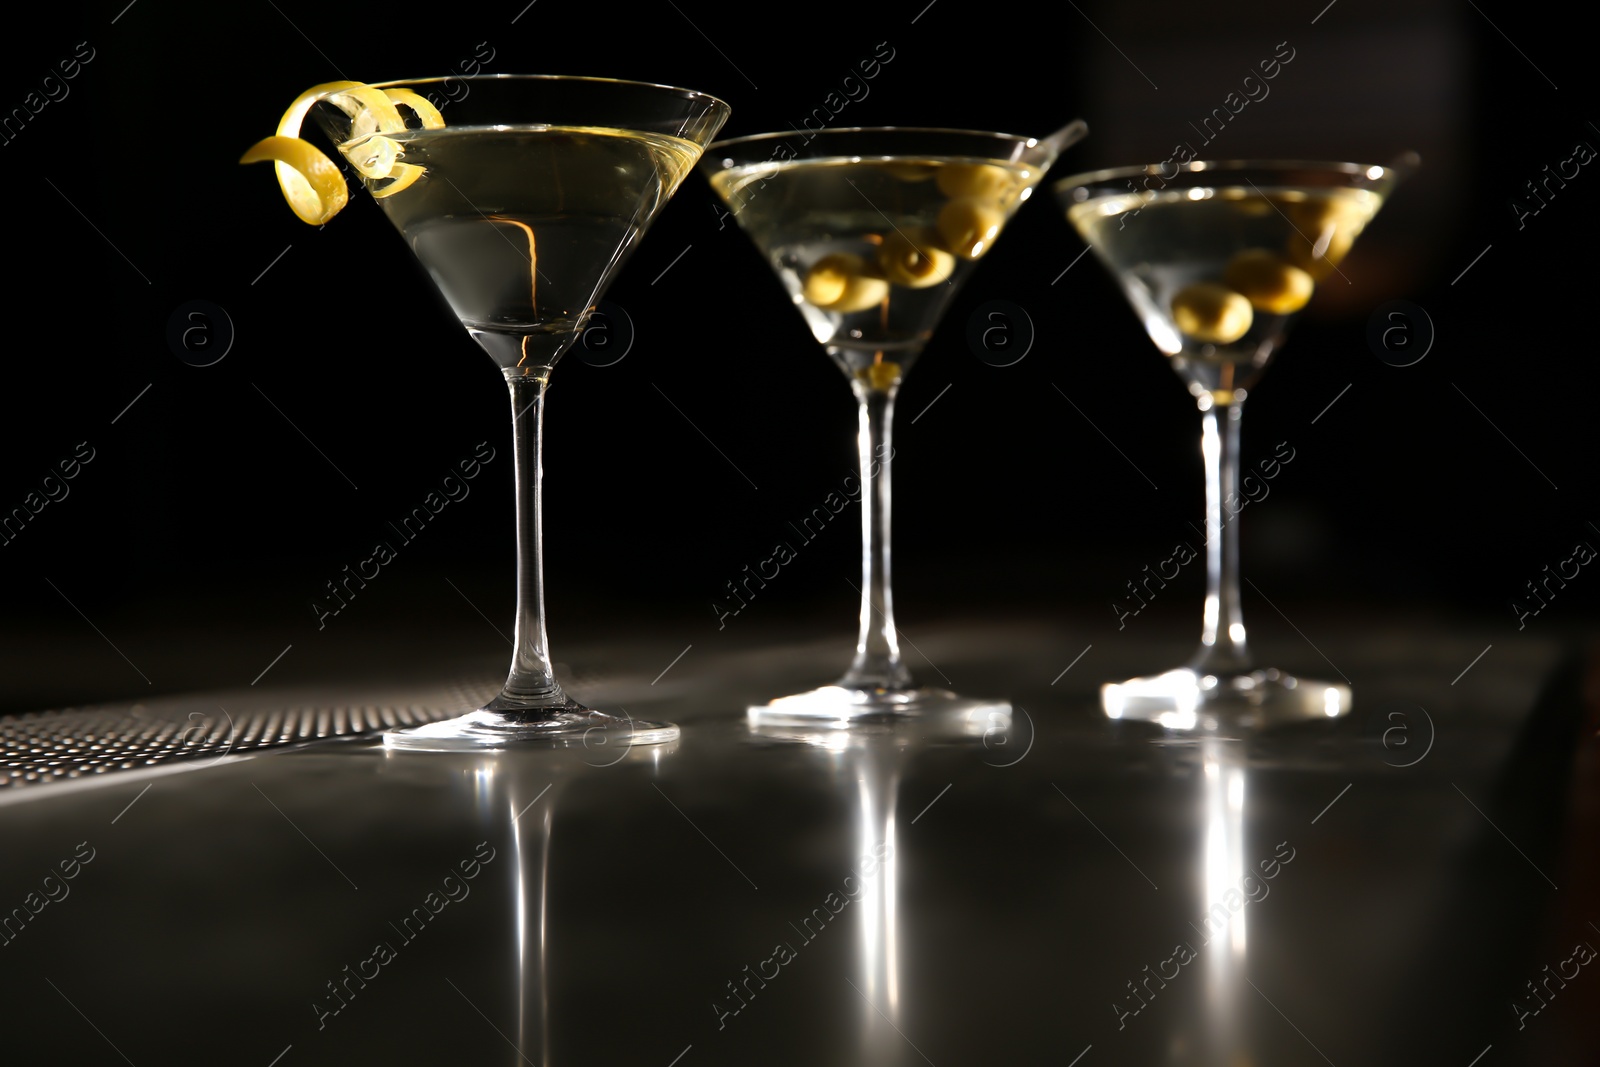 Photo of Glasses of martini cocktail with olives and lemon peel on bar counter. Space for text